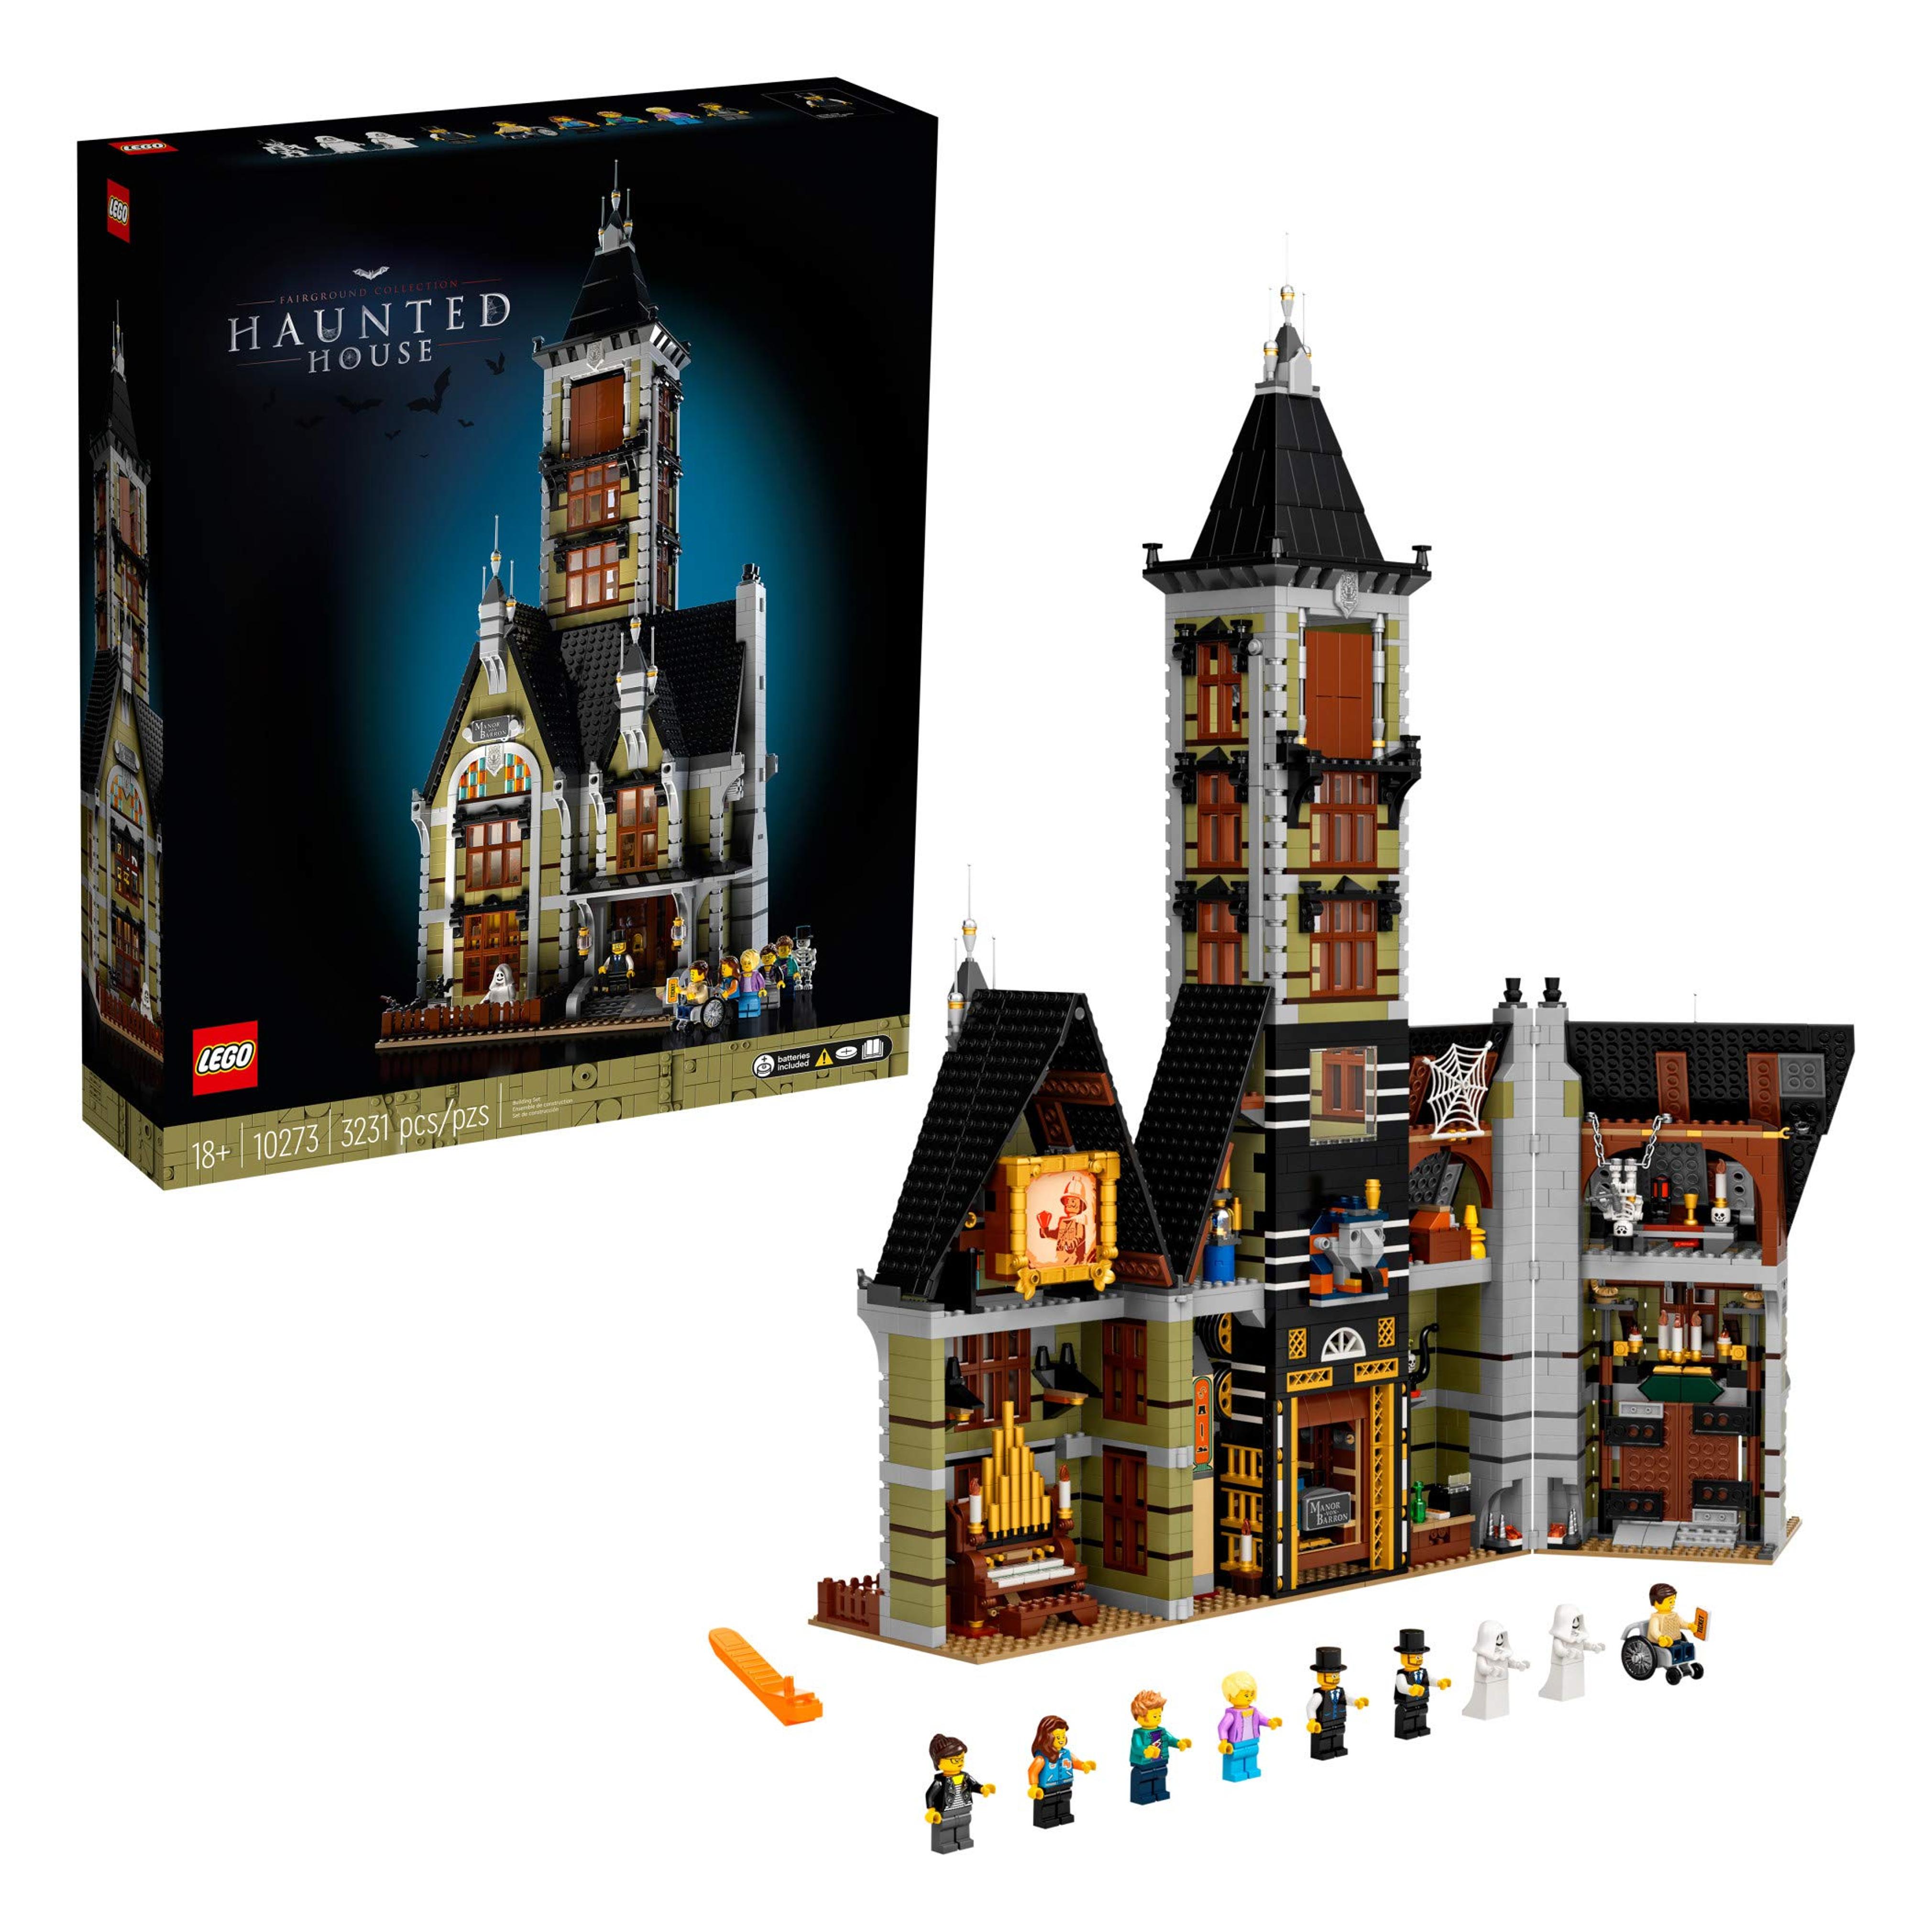 Amazon.com: LEGO Haunted House (10273) Building Kit; A Displayable Model Haunted House and a Creative DIY Project for Adults, New 2021 (3,231 Pieces) : Toys & Games